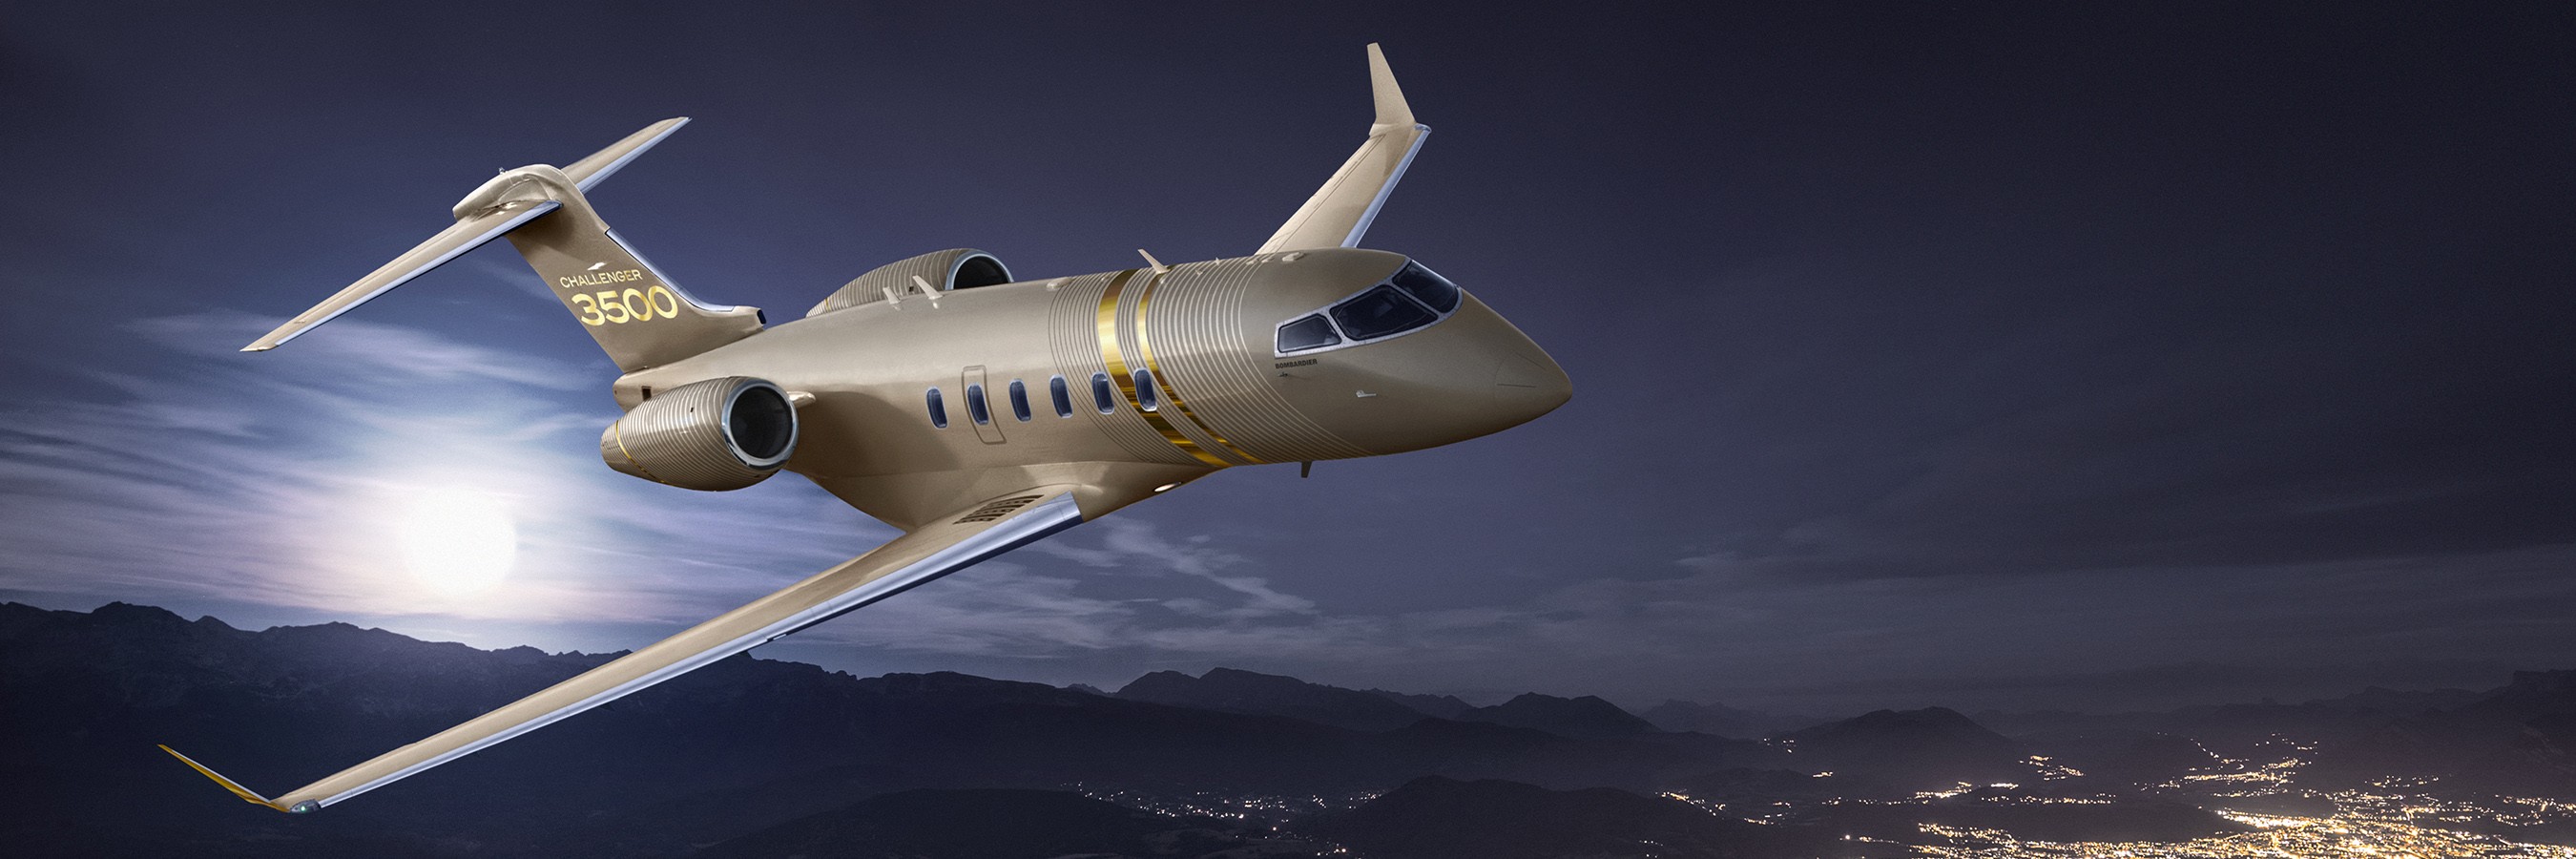 Introducing the Challenger 3500